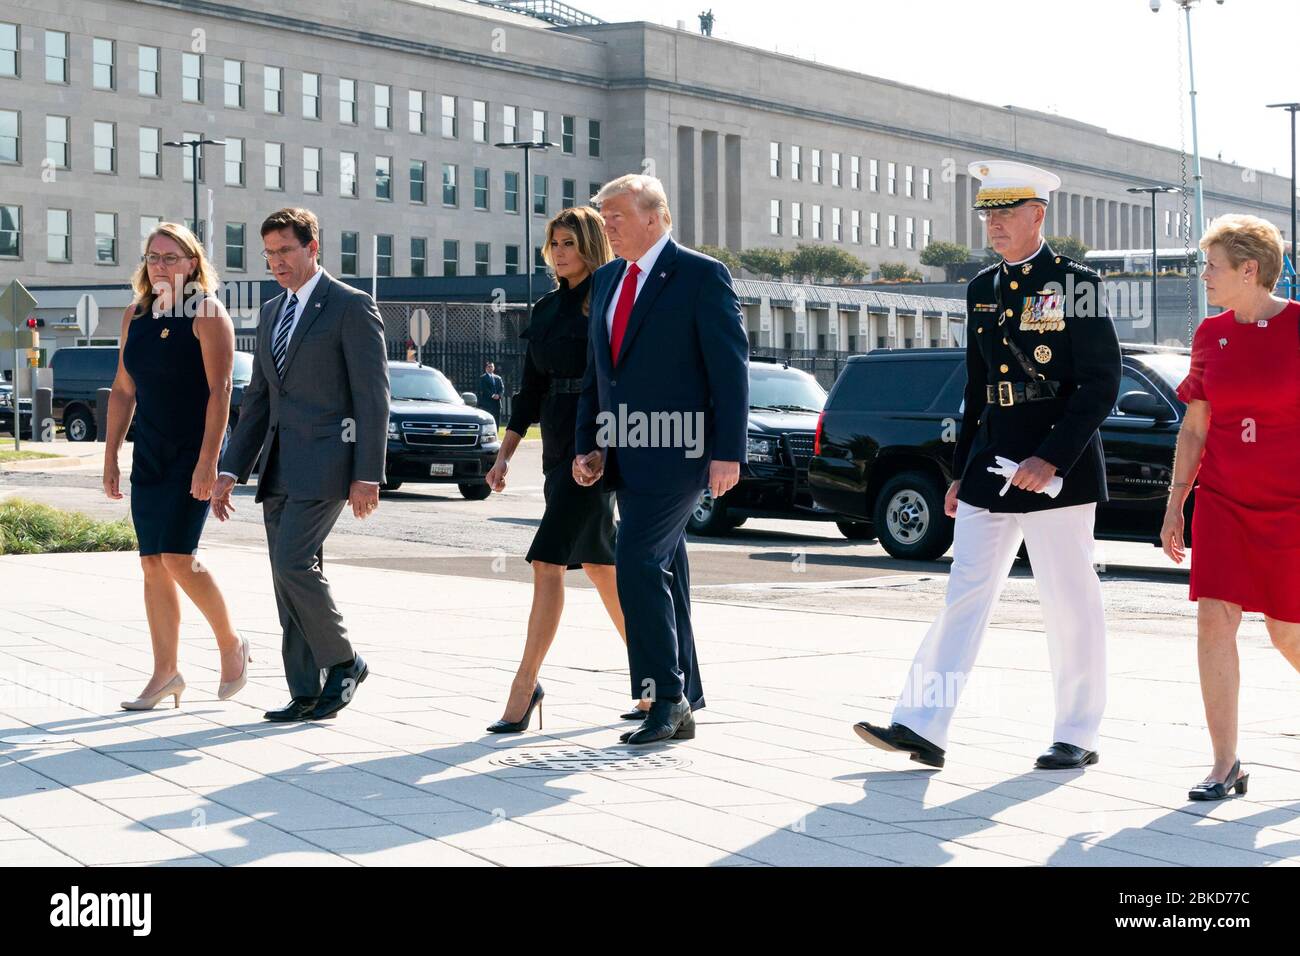 President Donald J. Trump and First Lady Melania Trump arrive to the September 11th Pentagon Observance Ceremony with the Secretary of Defense Mark Esper, his wife Leah Esper, the Chairman of the Joint Chiefs of Staff Gen. Joseph Dunford and his wife Ellyn Dunford Wednesday, Sept. 11, 2019, at the Pentagon in Arlington, Va. September 11 Stock Photo